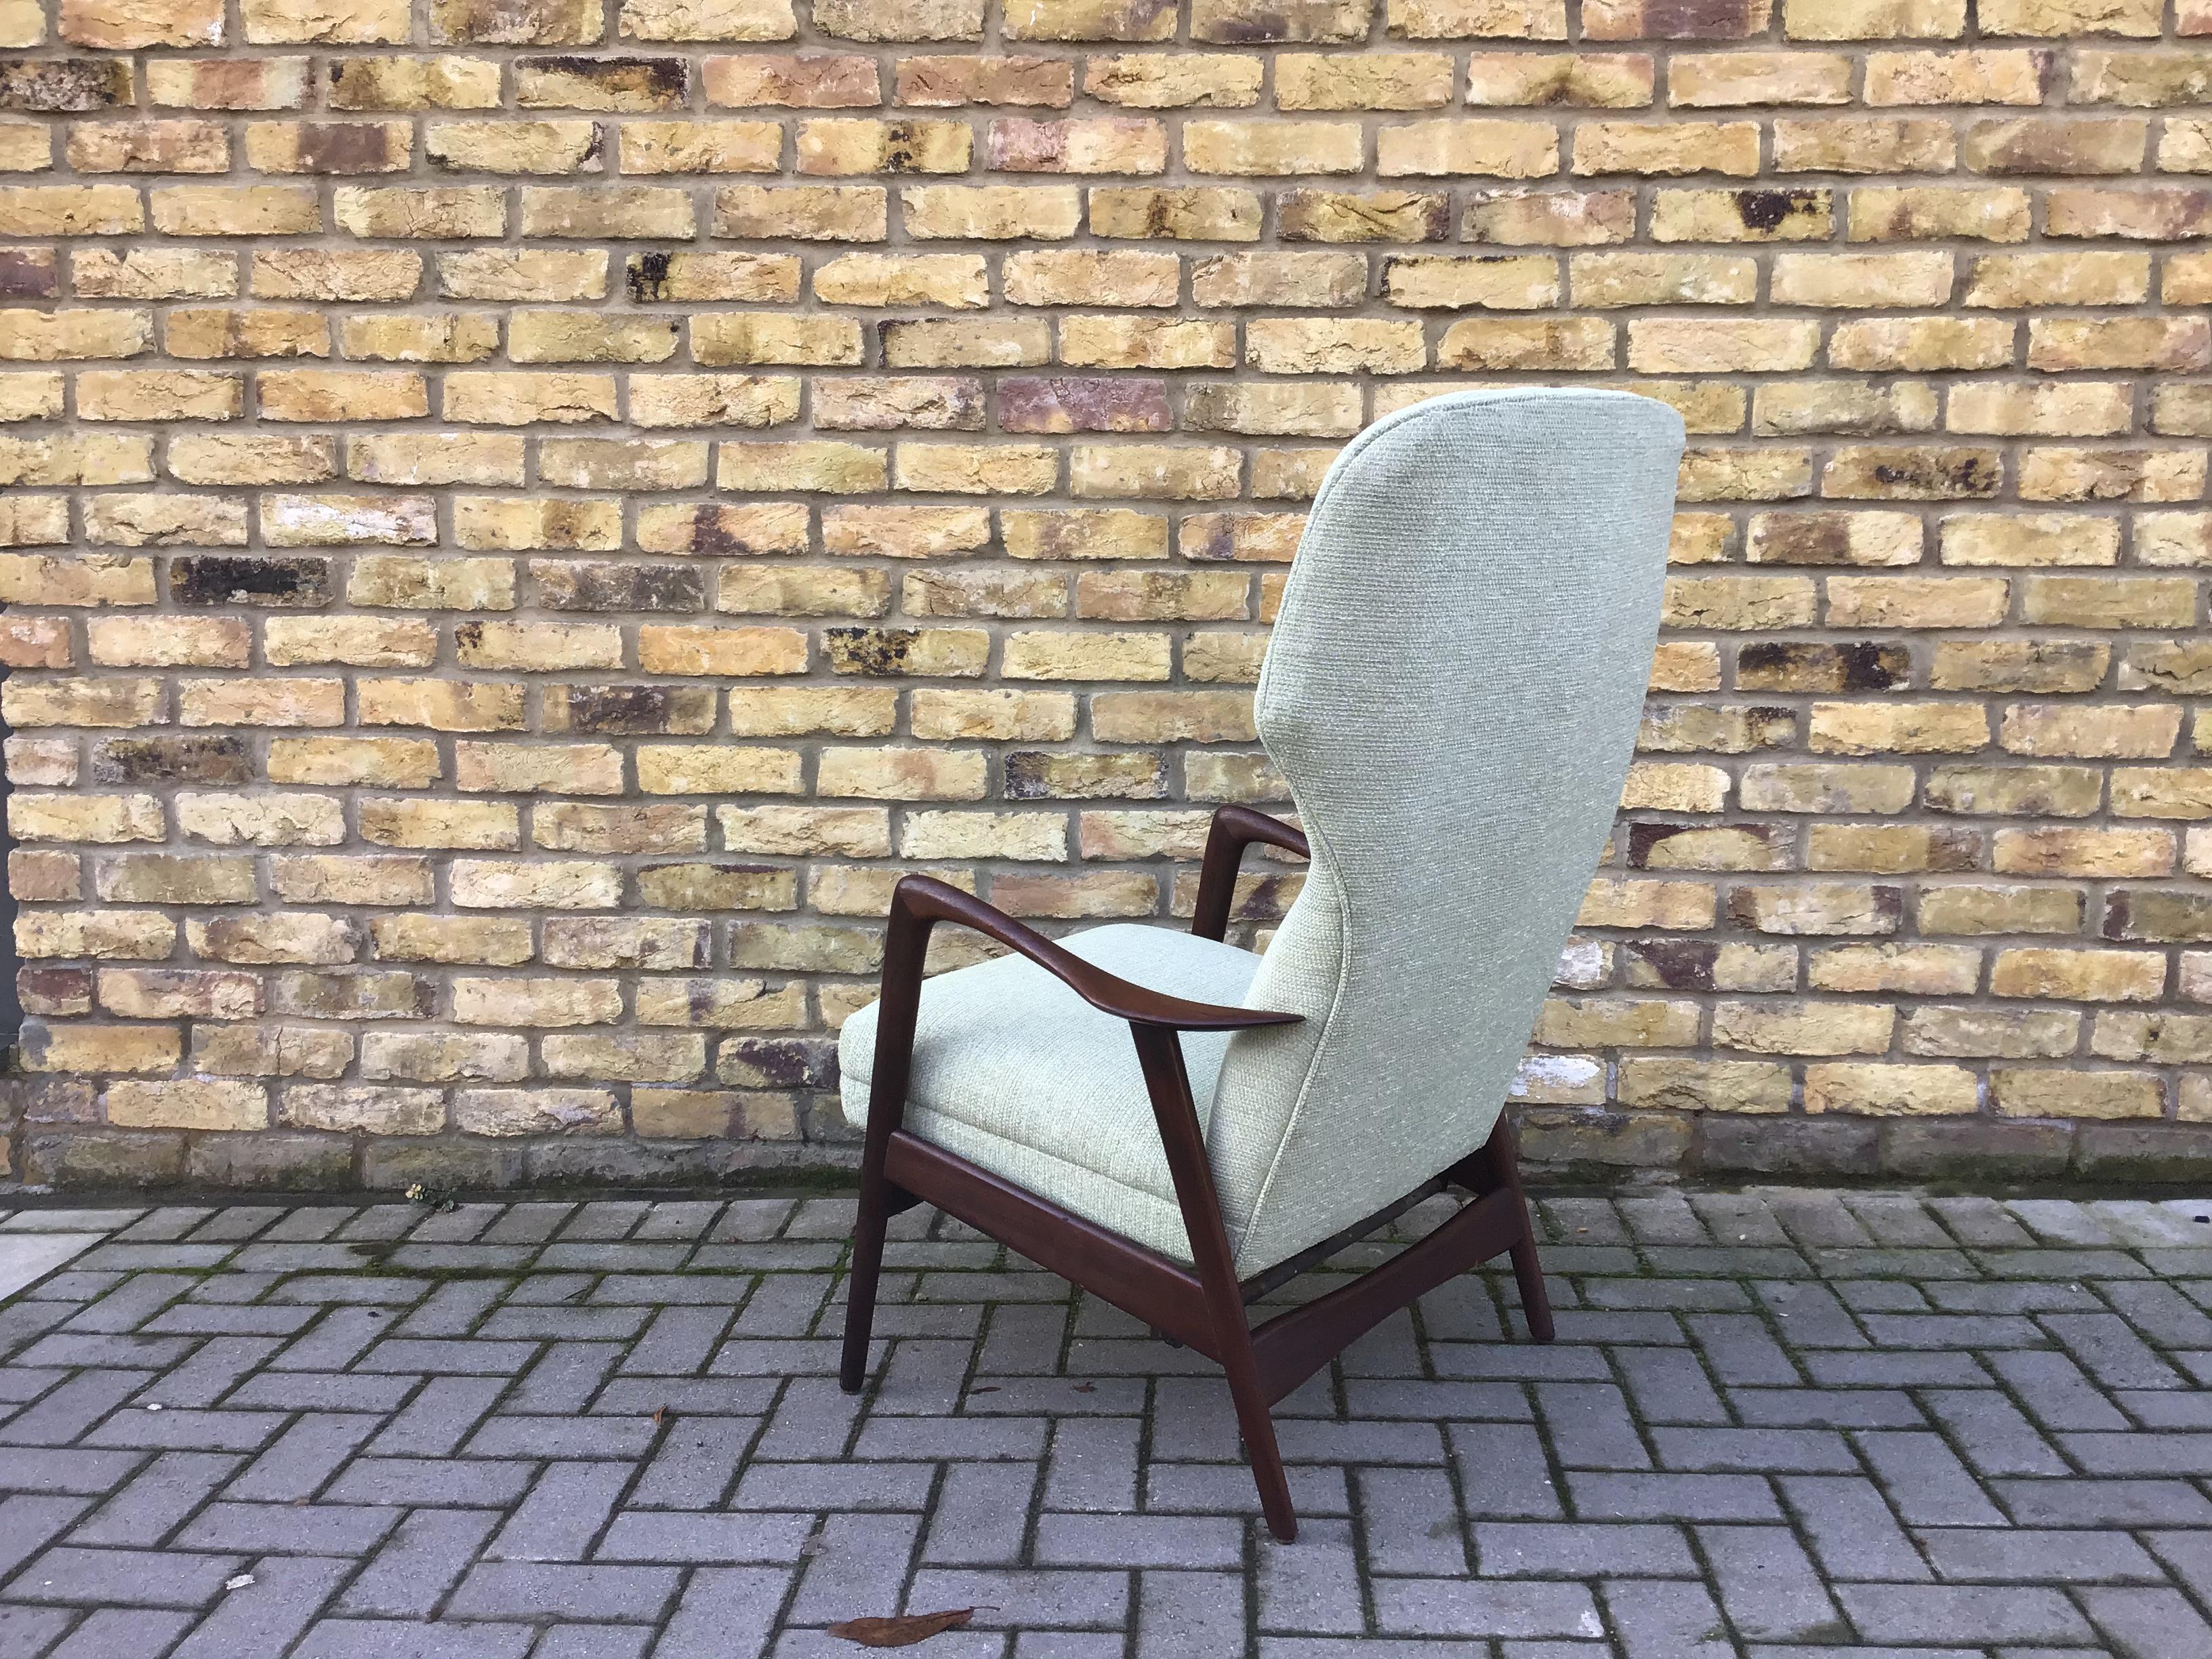 Gorgeous armchair reupholstered in pale green woolen fabric 
High chair with function to make it into a rocker unusual item
Attribute to Aksel Bender Madsen, circa 1960s.